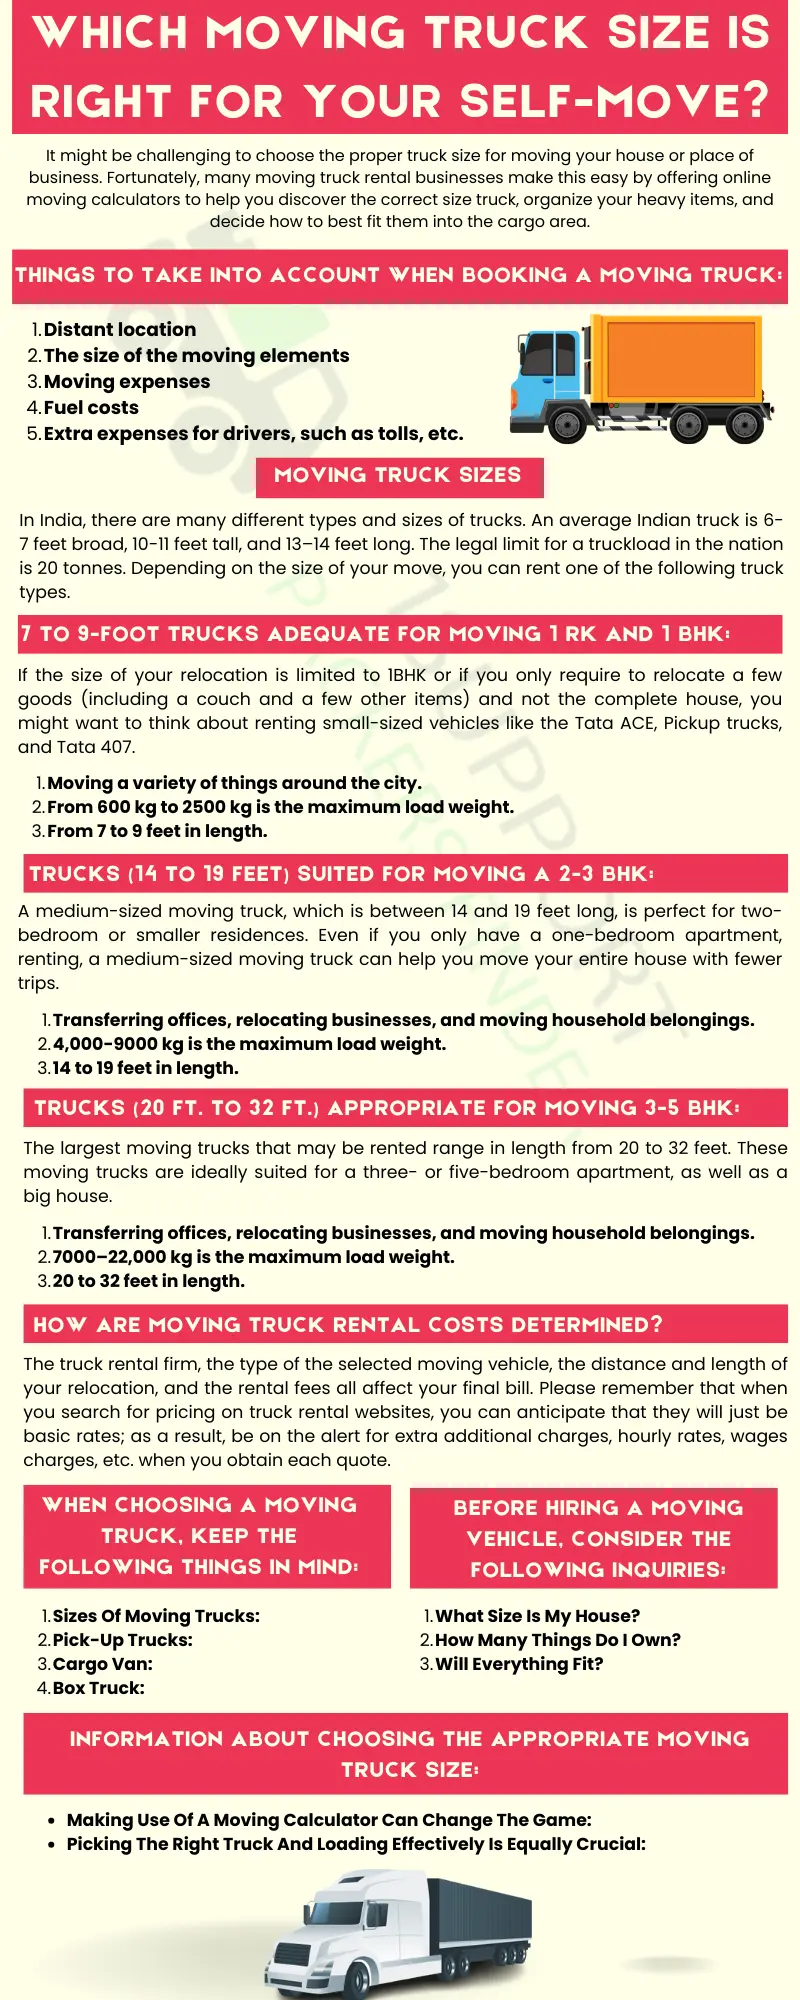 Which Moving Truck Size Is Right For Your Self-Move Informational Infographic